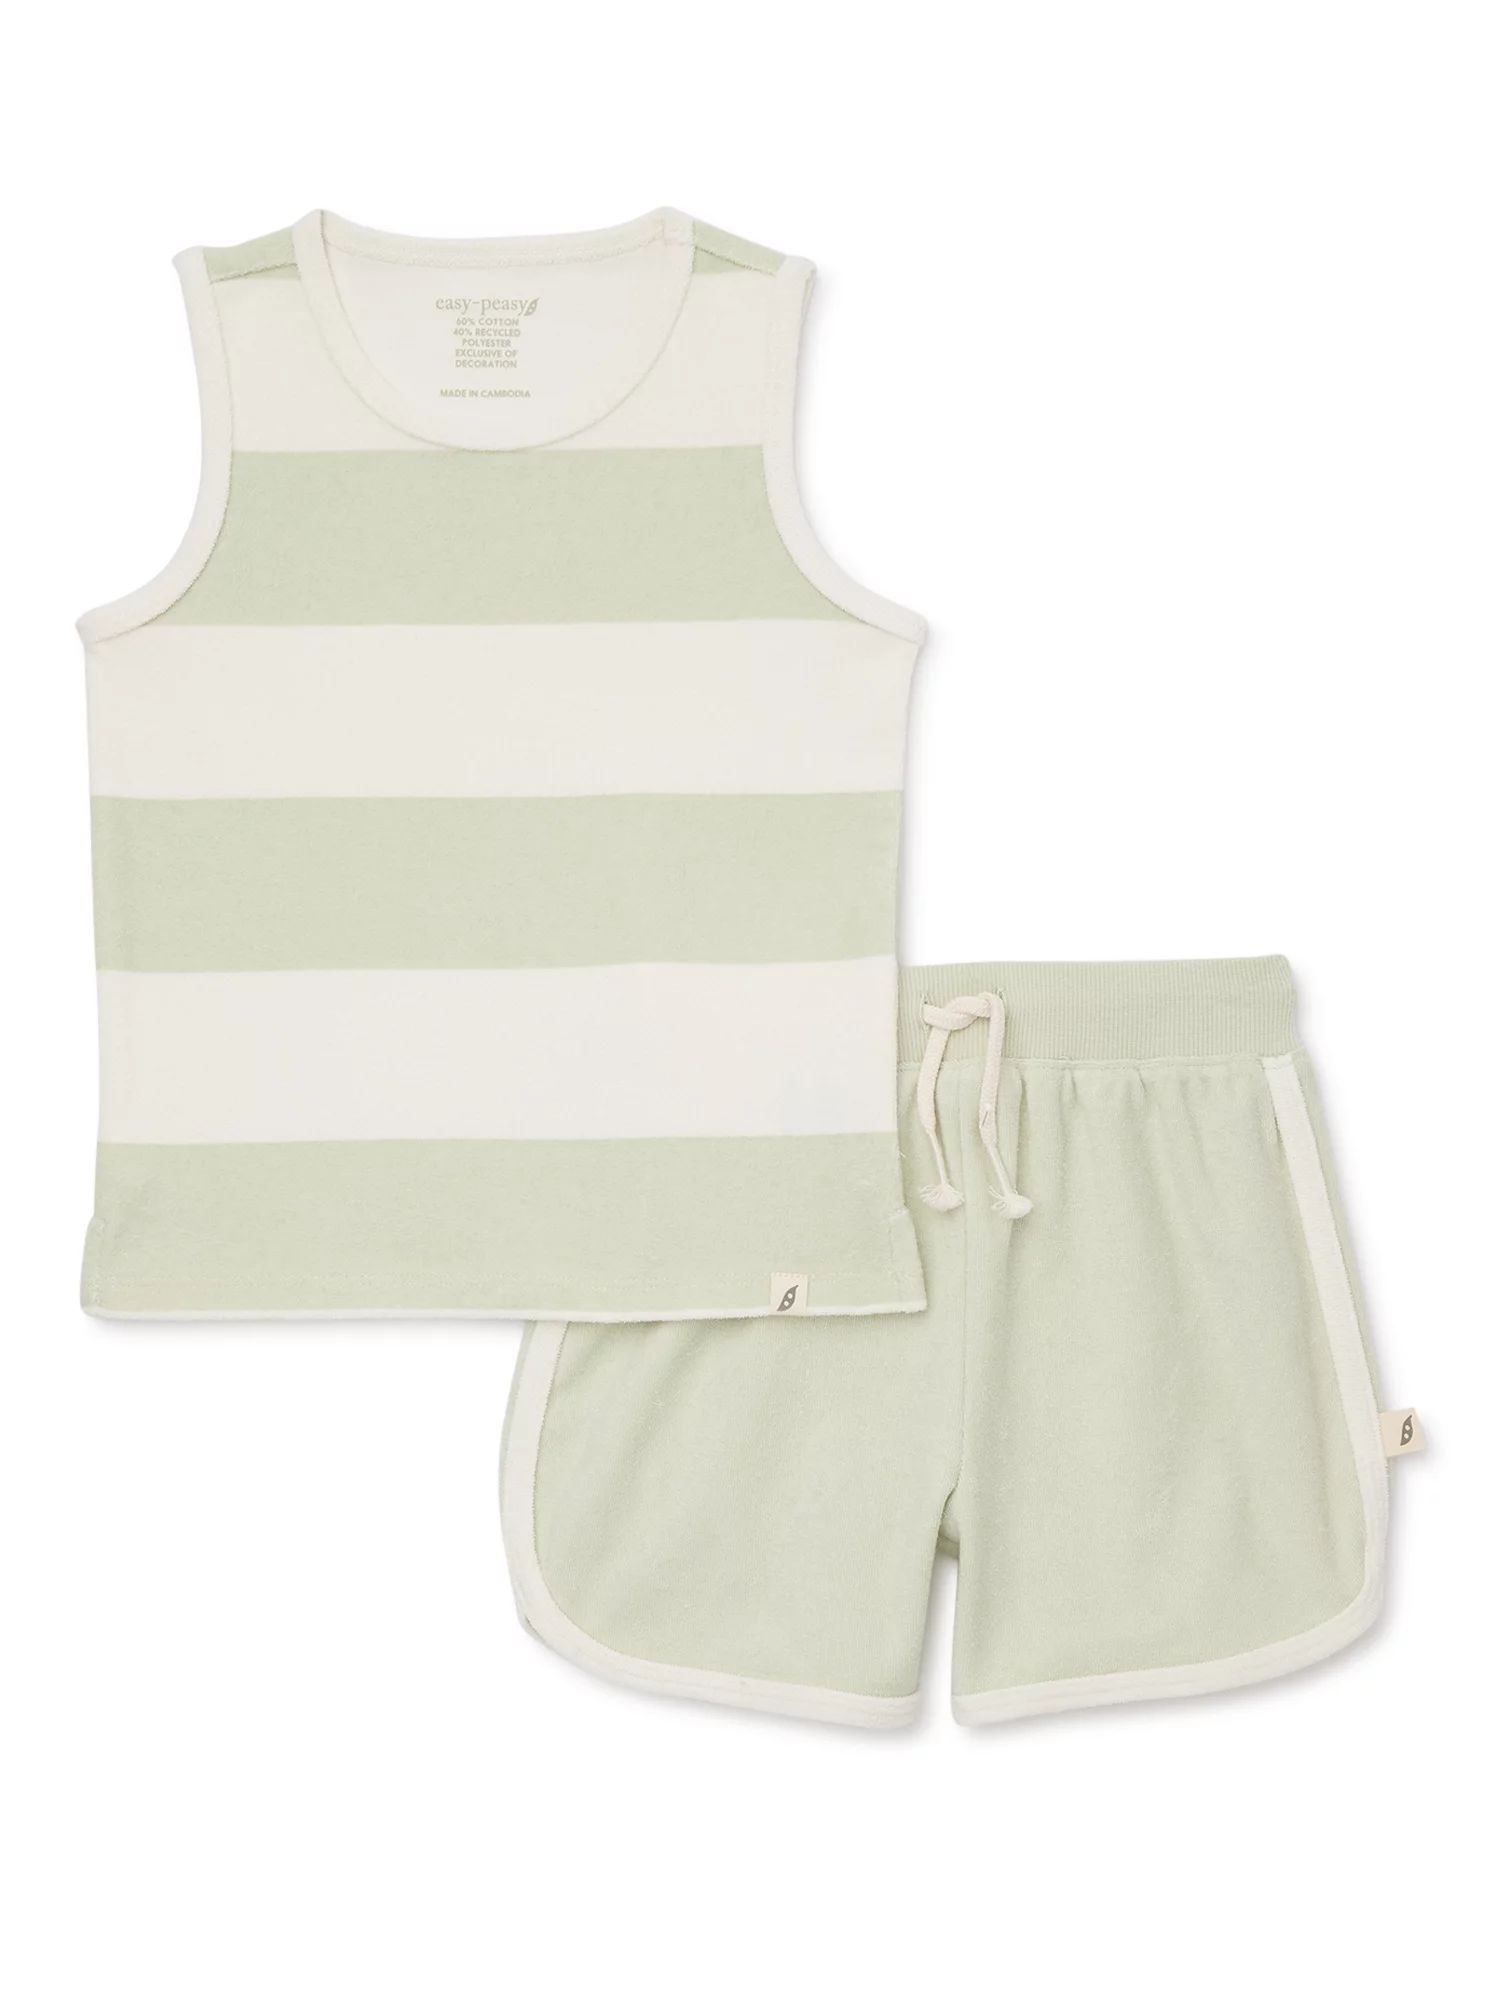 easy-peasy Baby and Toddler Boy Terry Cloth Tank Top and Shorts Outfit Set, 2-Piece, Sizes 12M-5T | Walmart (US)